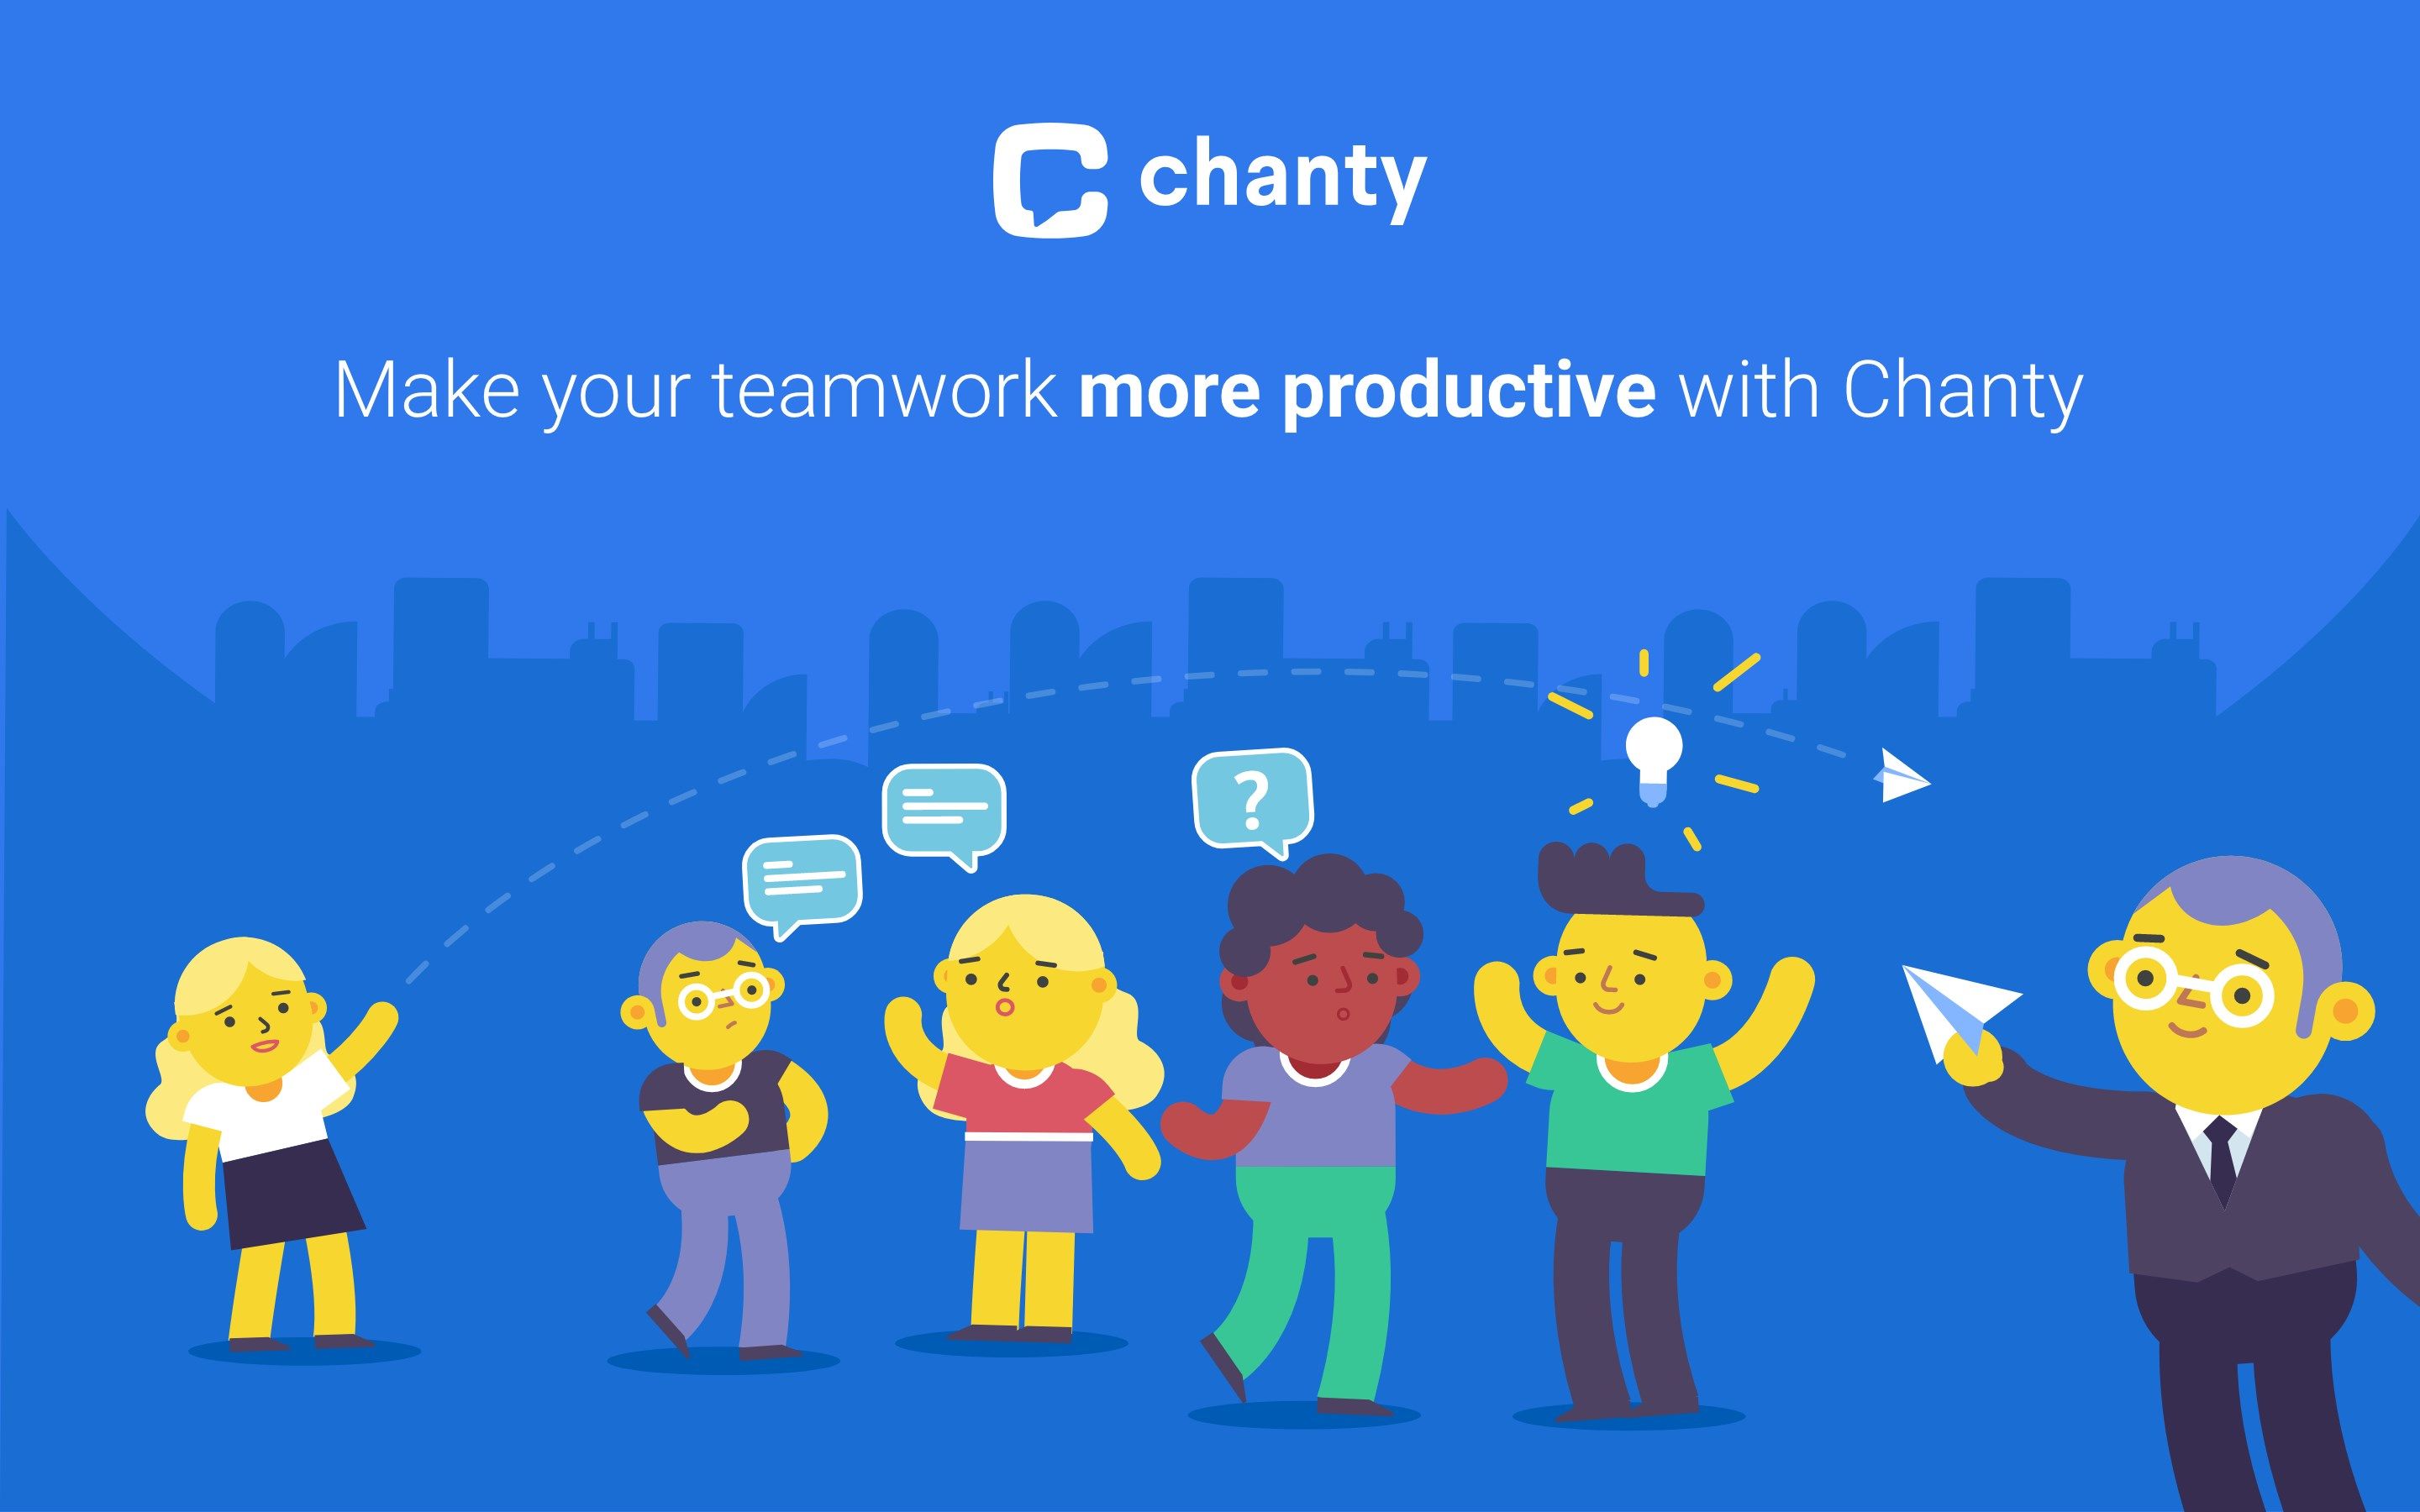 Make your teamwork more productive with Chanty